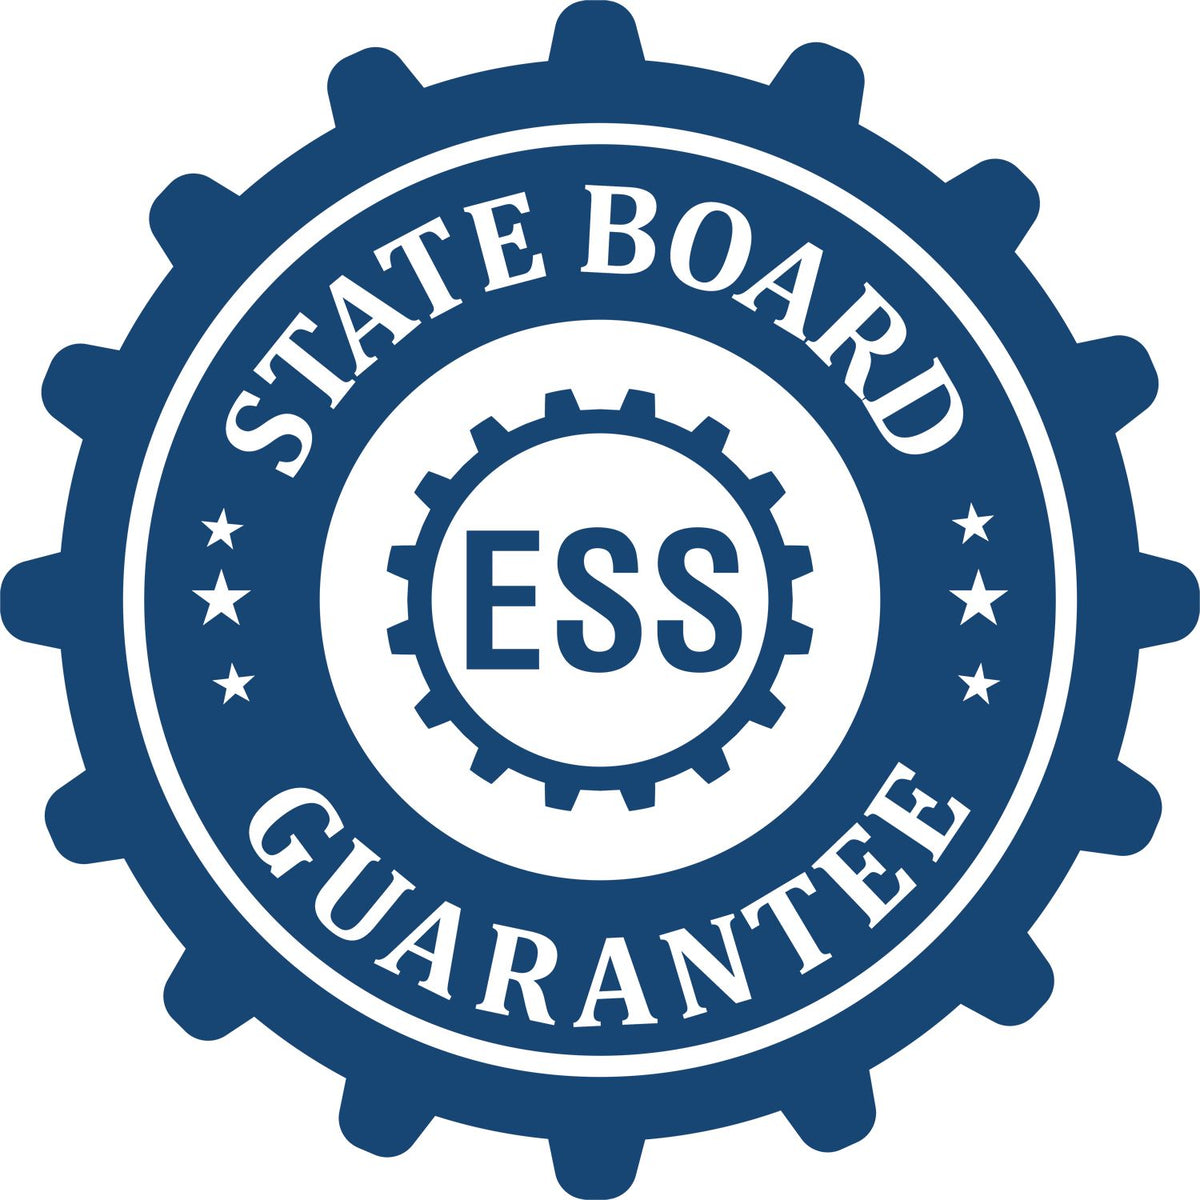 An emblem in a gear shape illustrating a state board guarantee for the State of Connecticut Extended Long Reach Engineer Seal product.